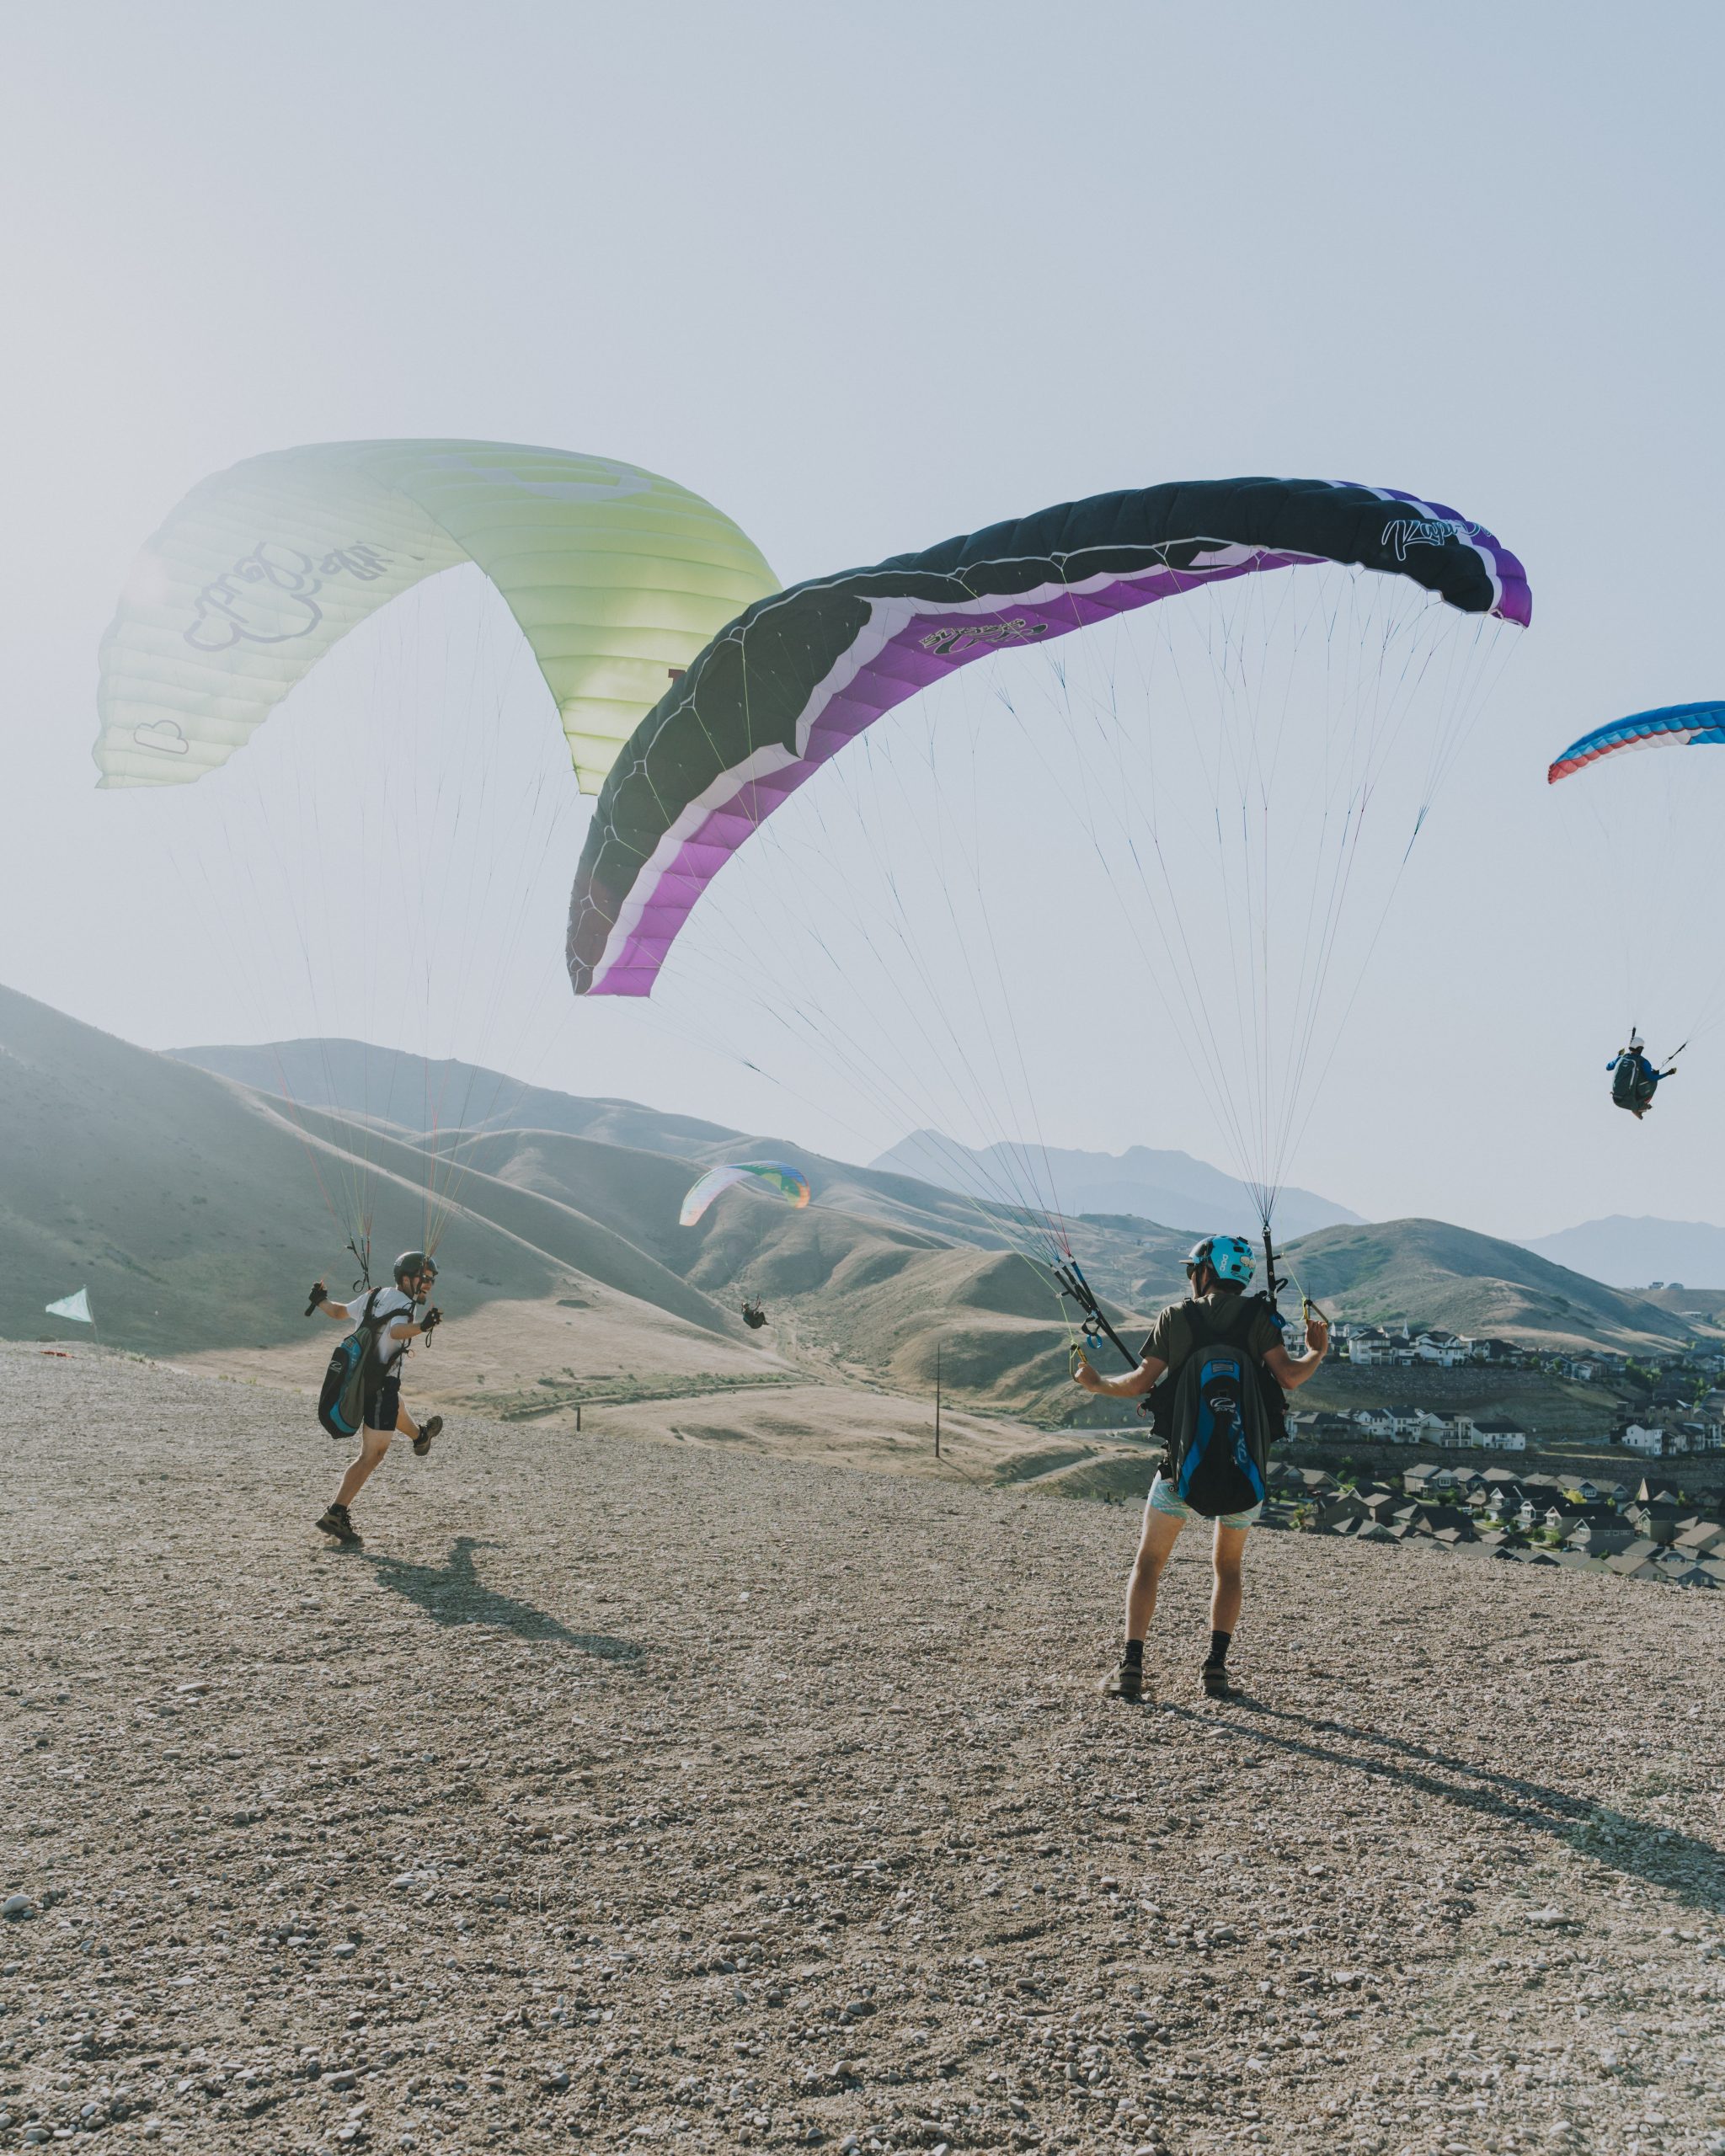 gallery image for Paragliding in The Atlas Mountains